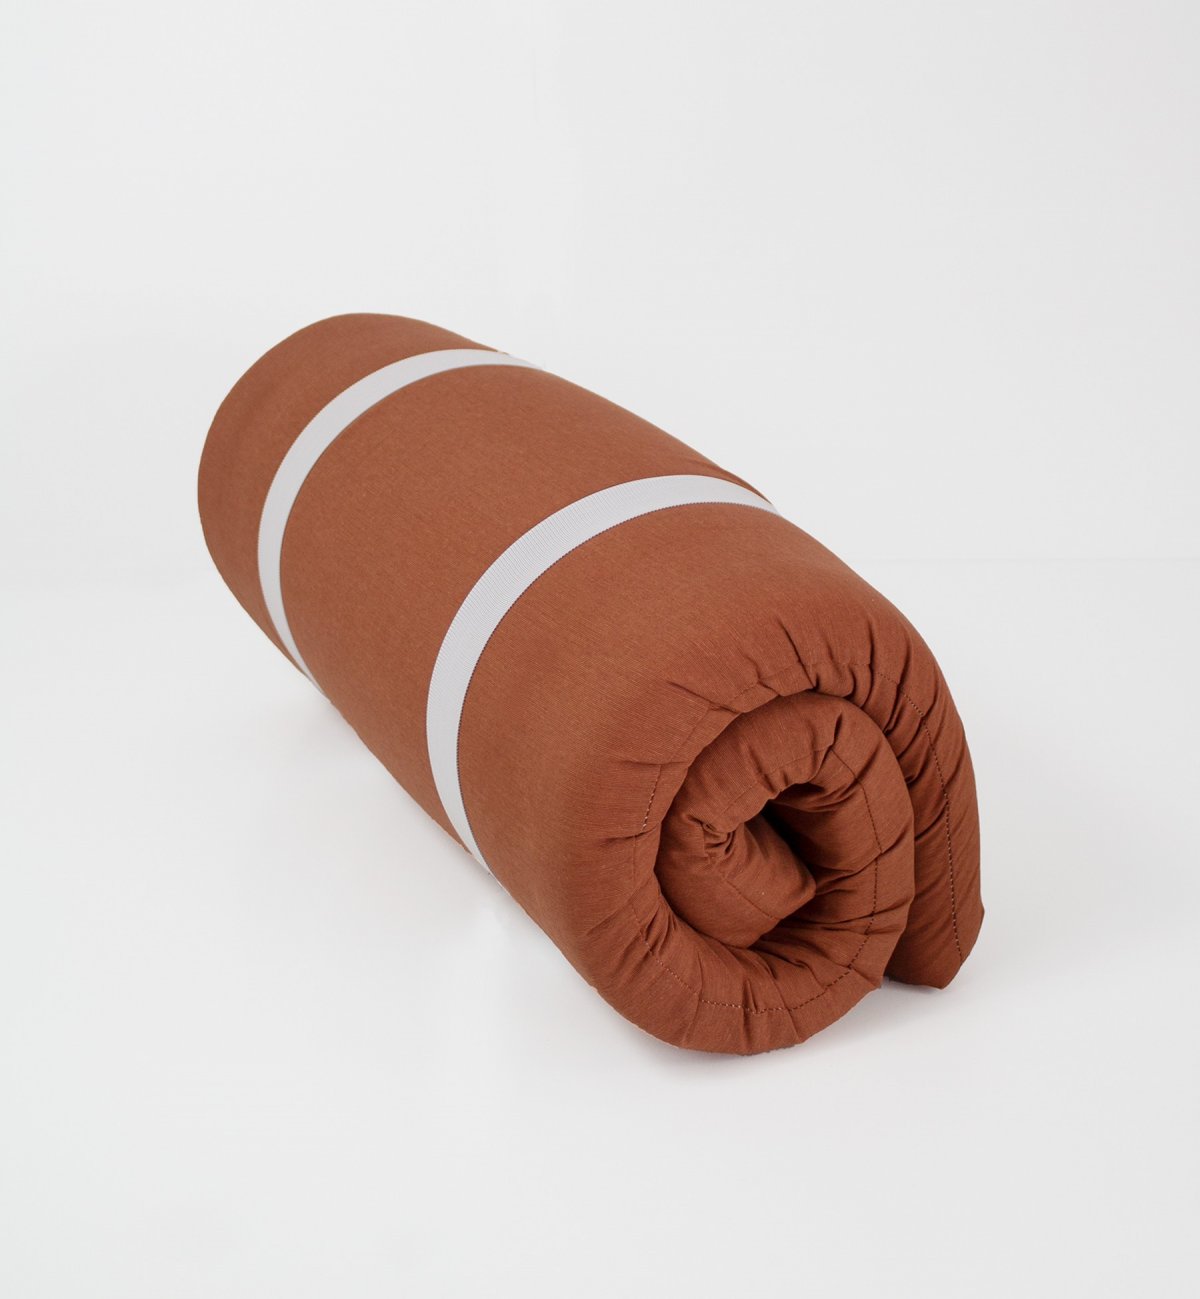 Removable rolled travel mattress for baby Kadolis